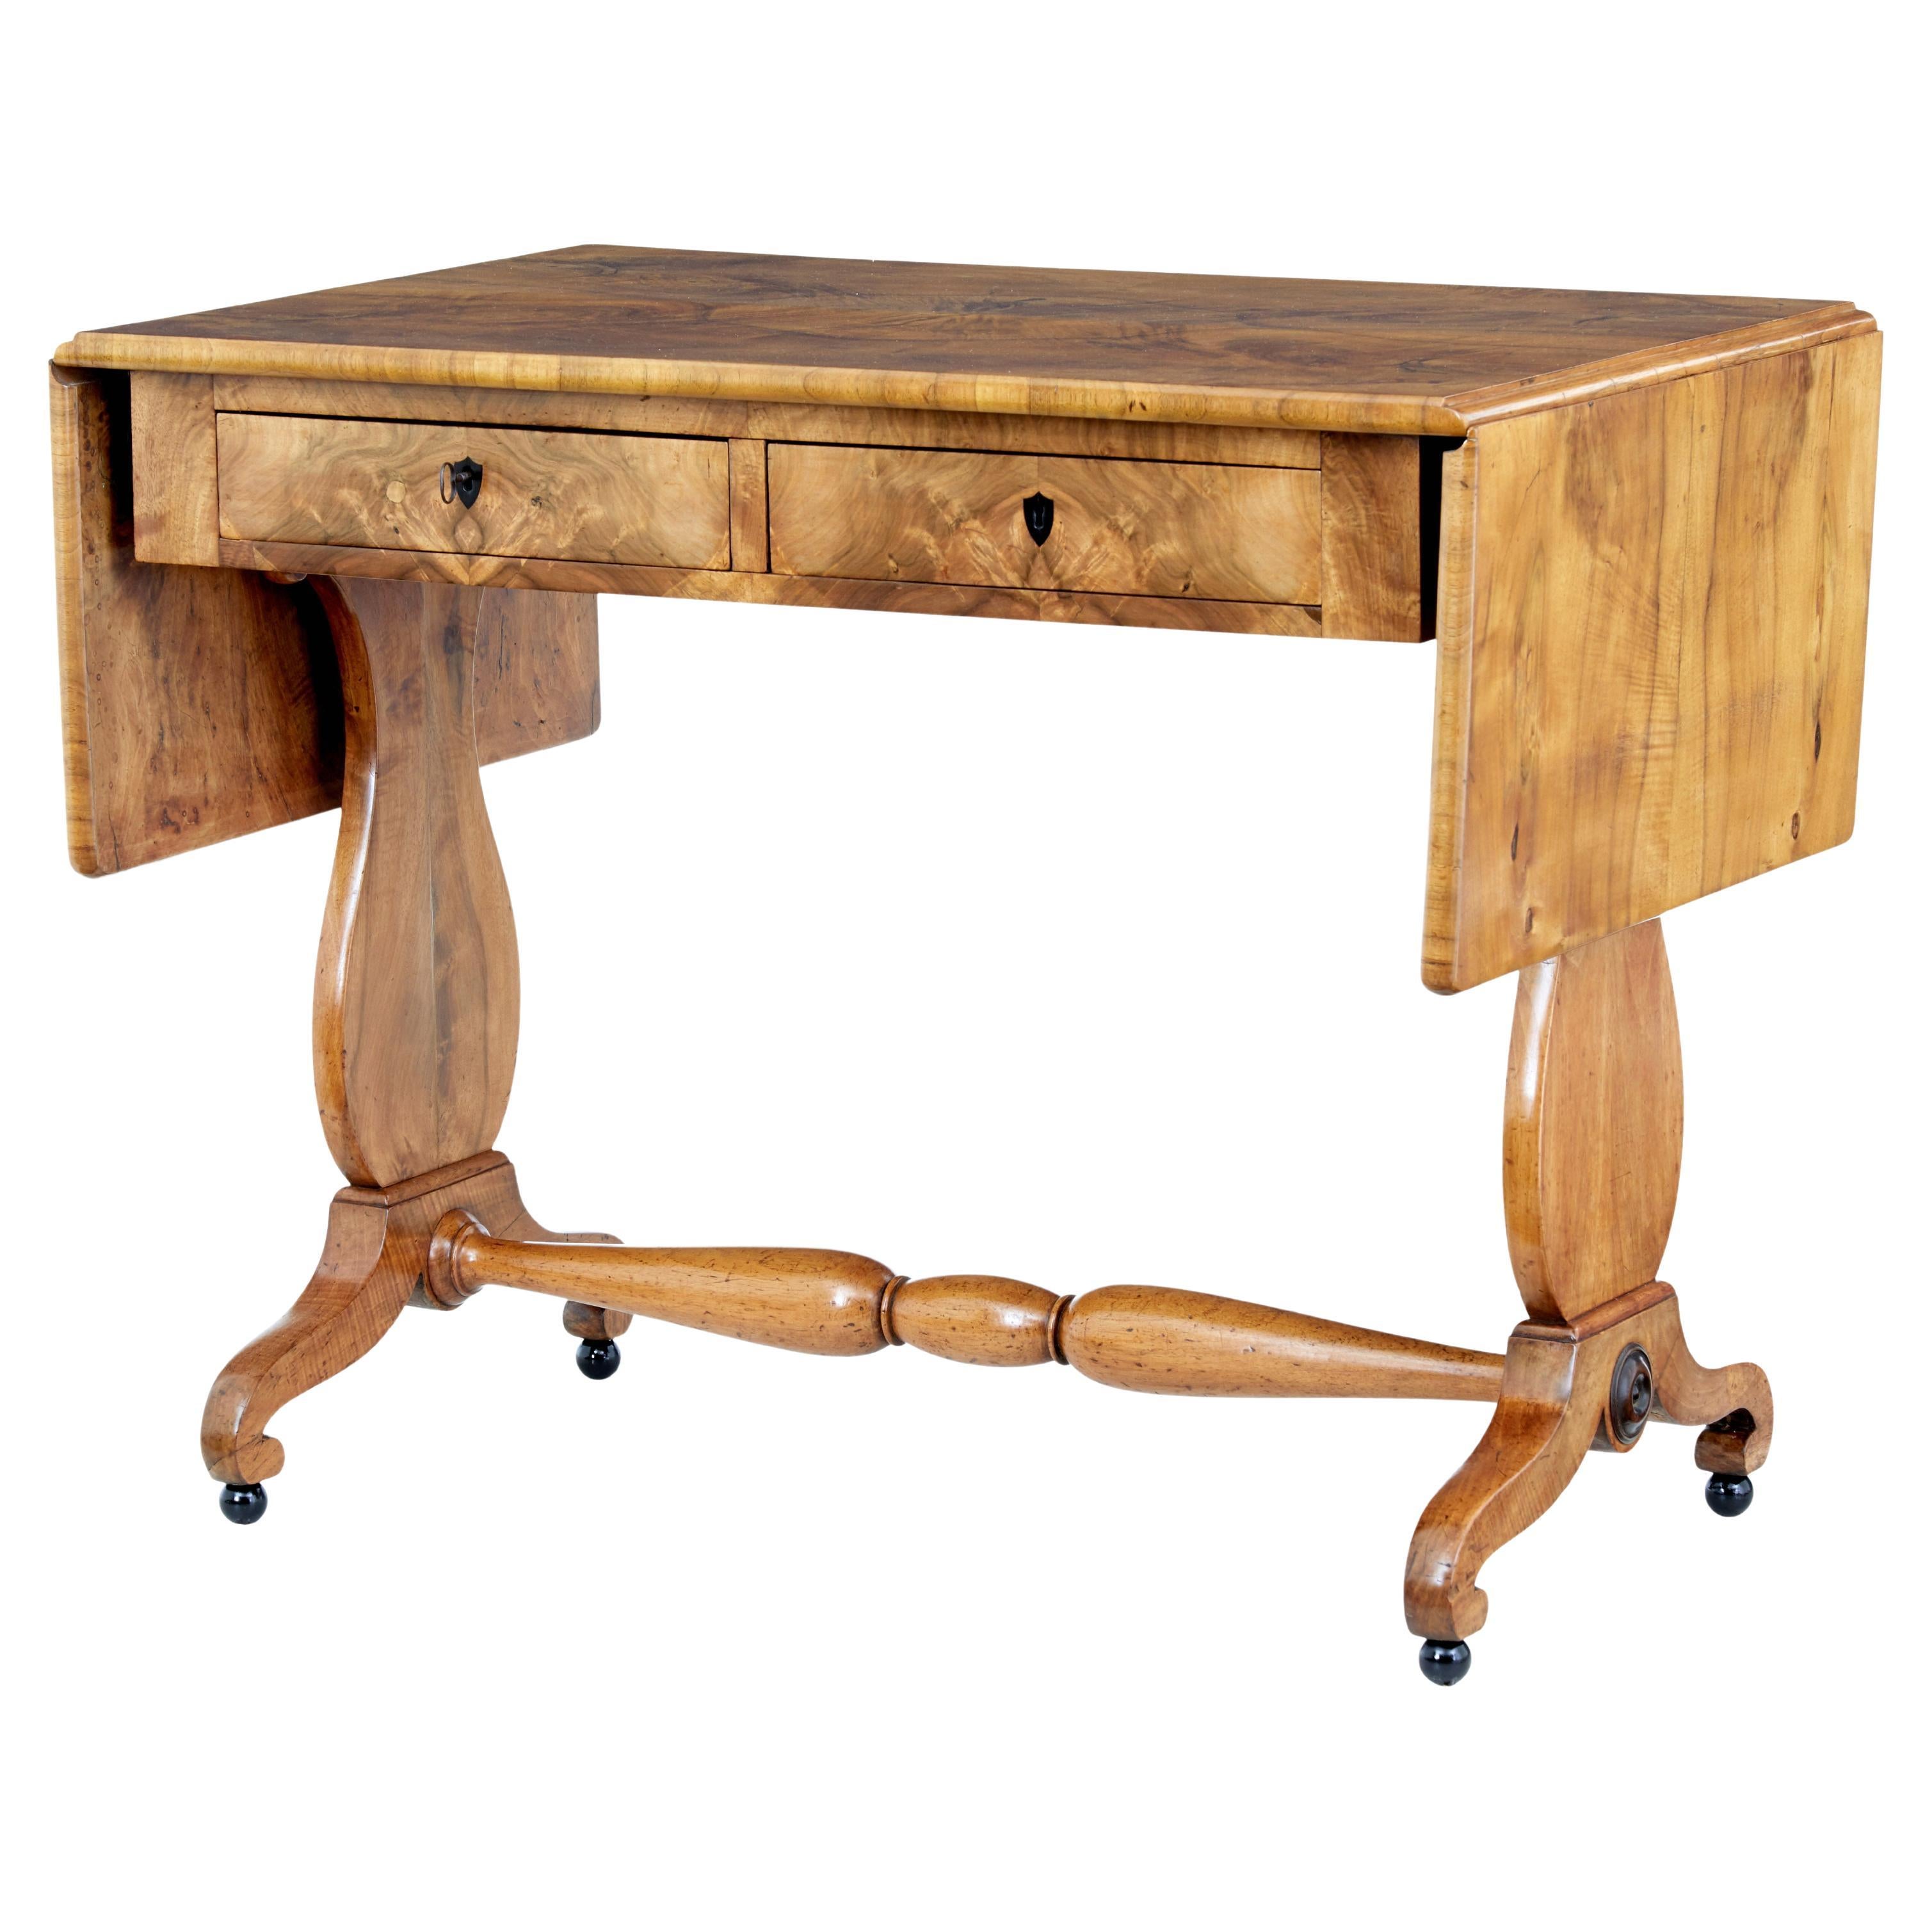 Swedish Empire Revival 1870s Birch Sofa Table with Drop Leaves and Carved Legs For Sale